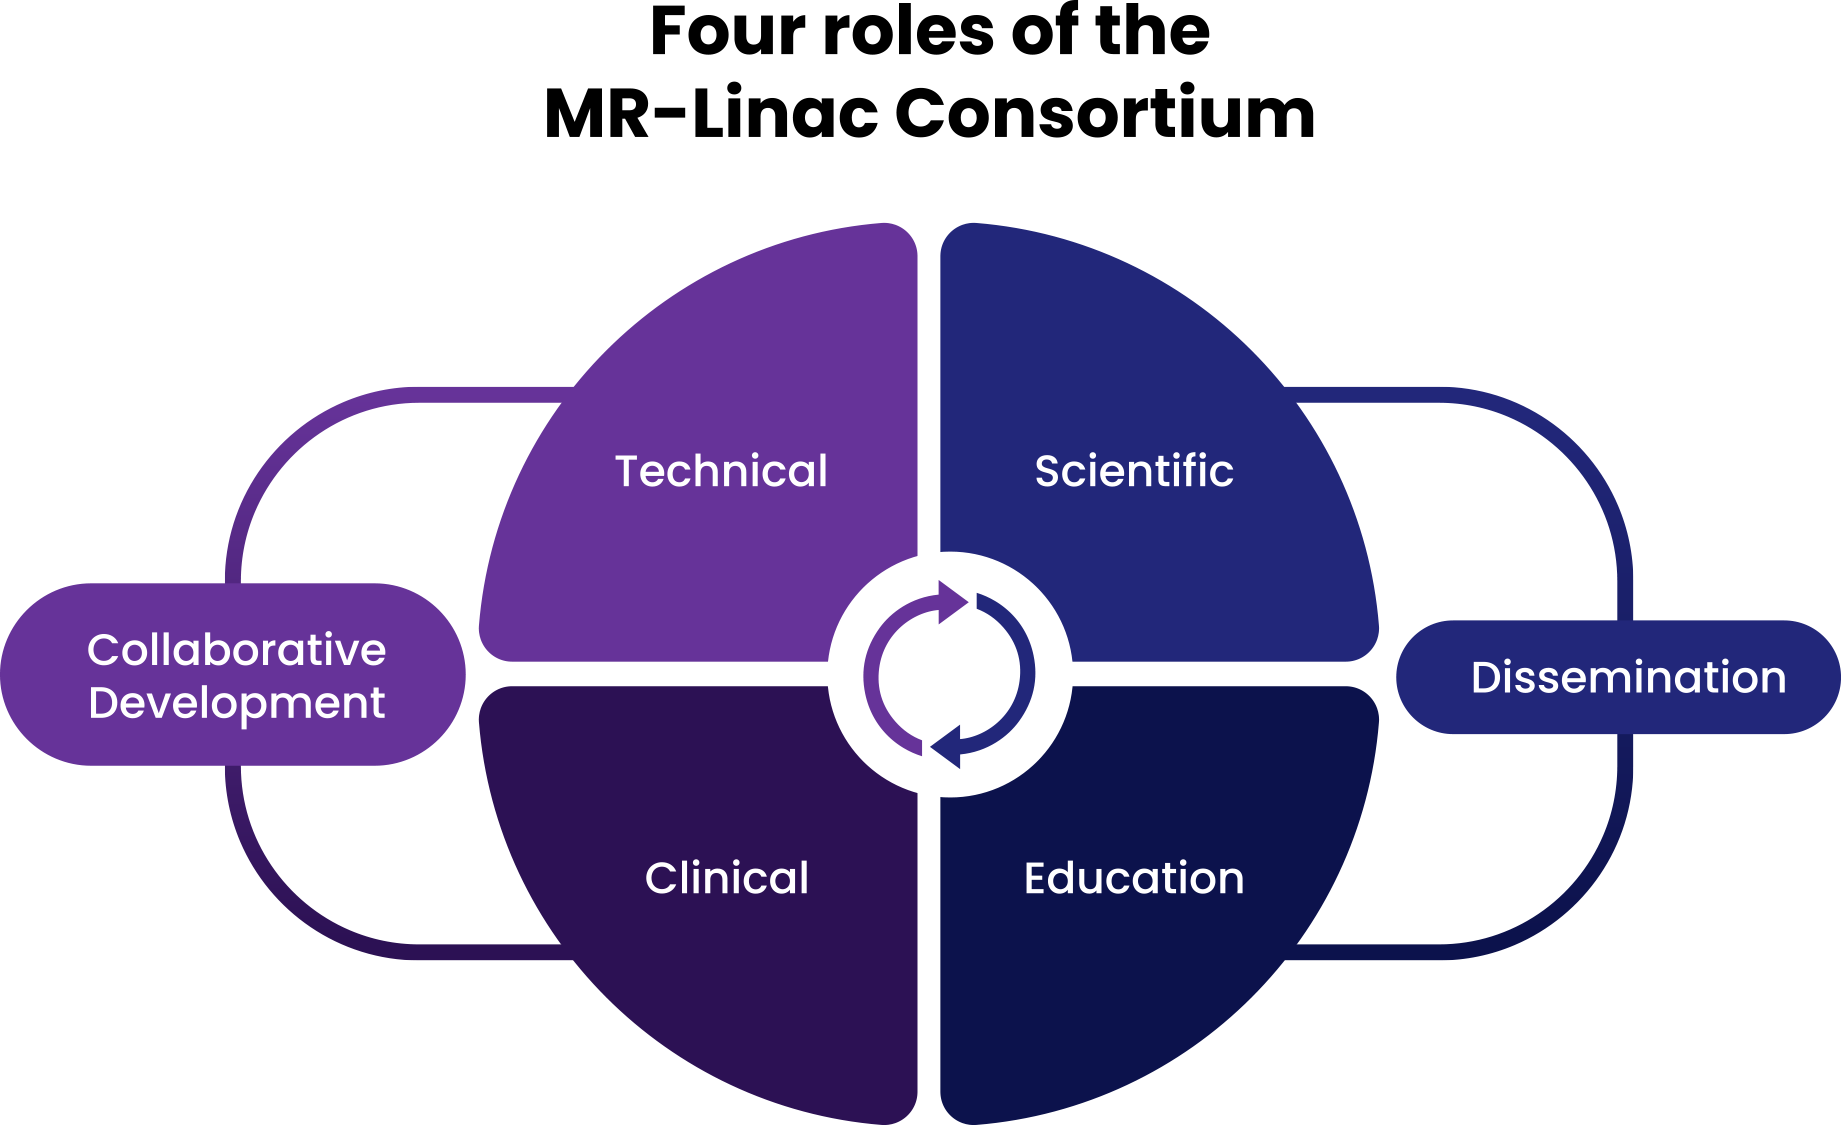 Illistration showing the four roles of the MR-Linac Consortium: Technical, Scientific, Clinical, and Educational